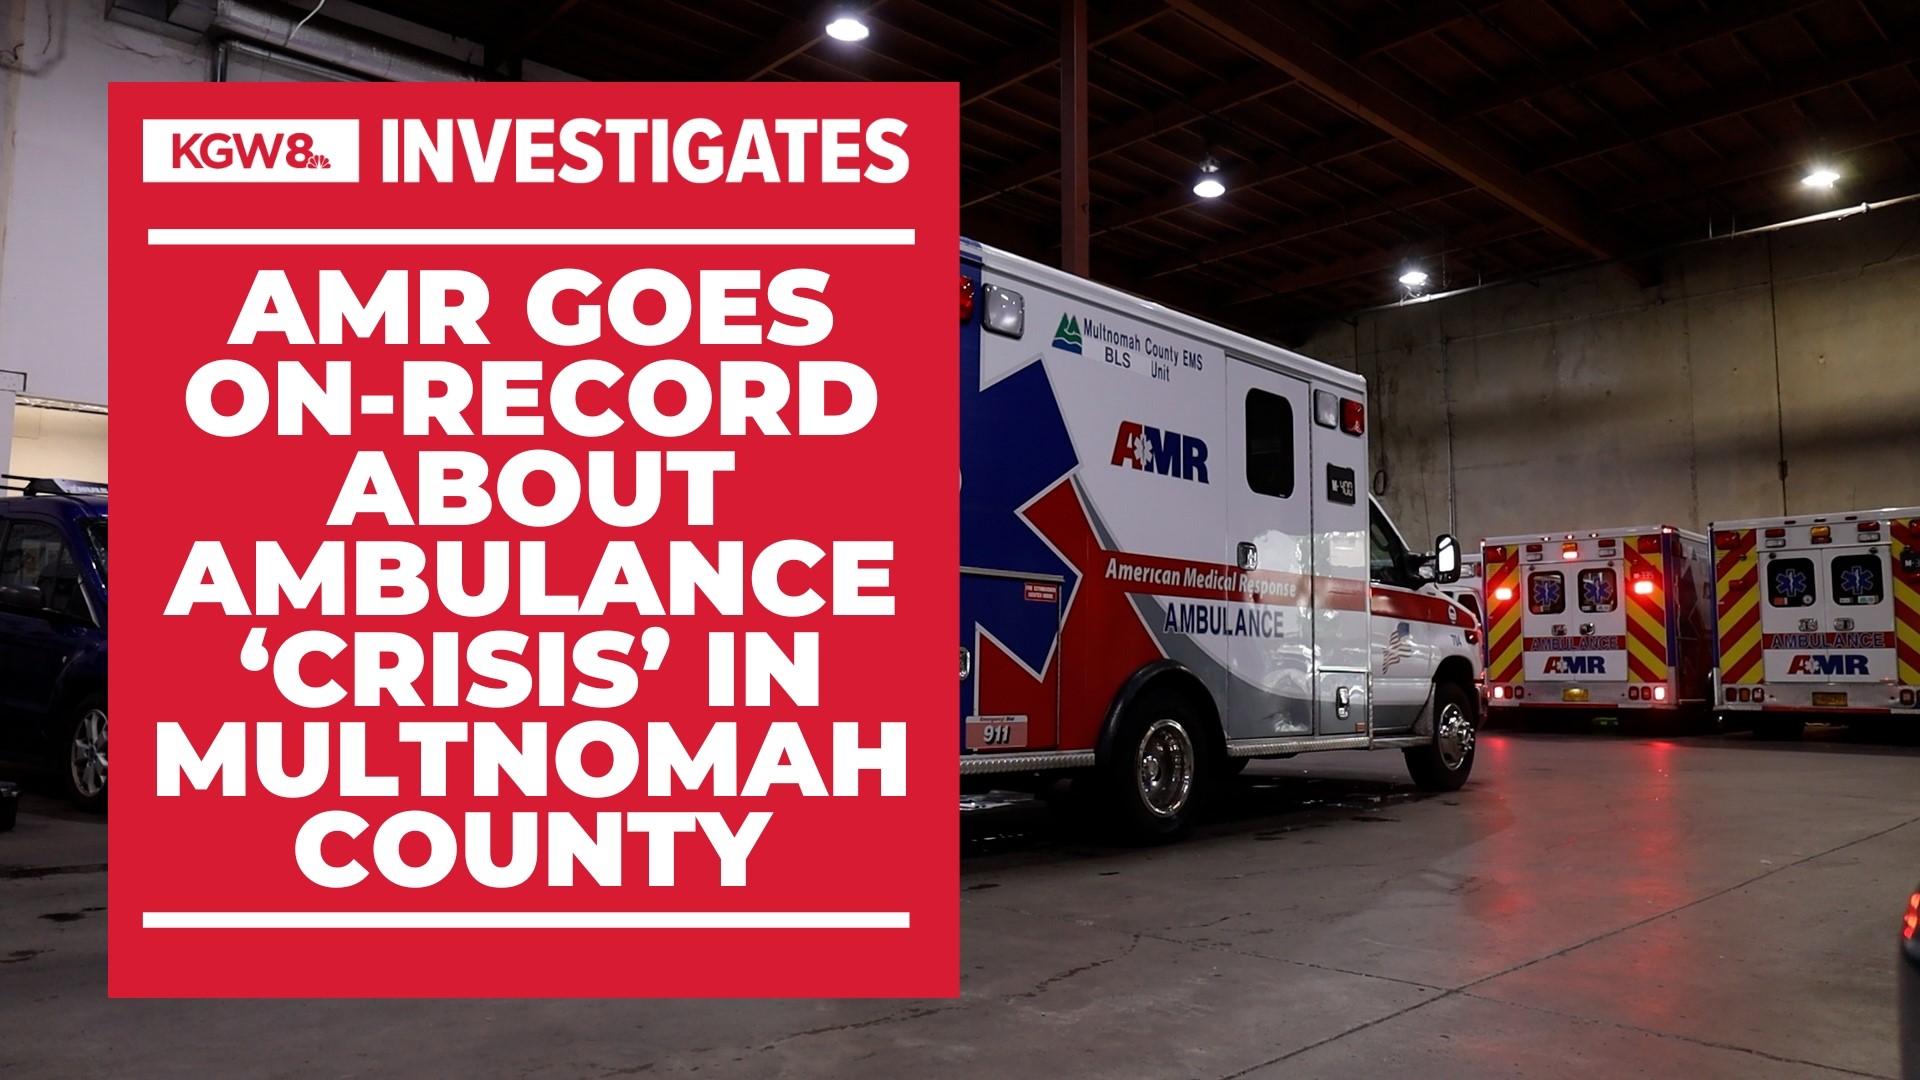 After Multnomah County leaders decided to fine AMR $513,650 for late ambulance responses in August, AMR leaders decided to respond on-camera, sounding the alarm.